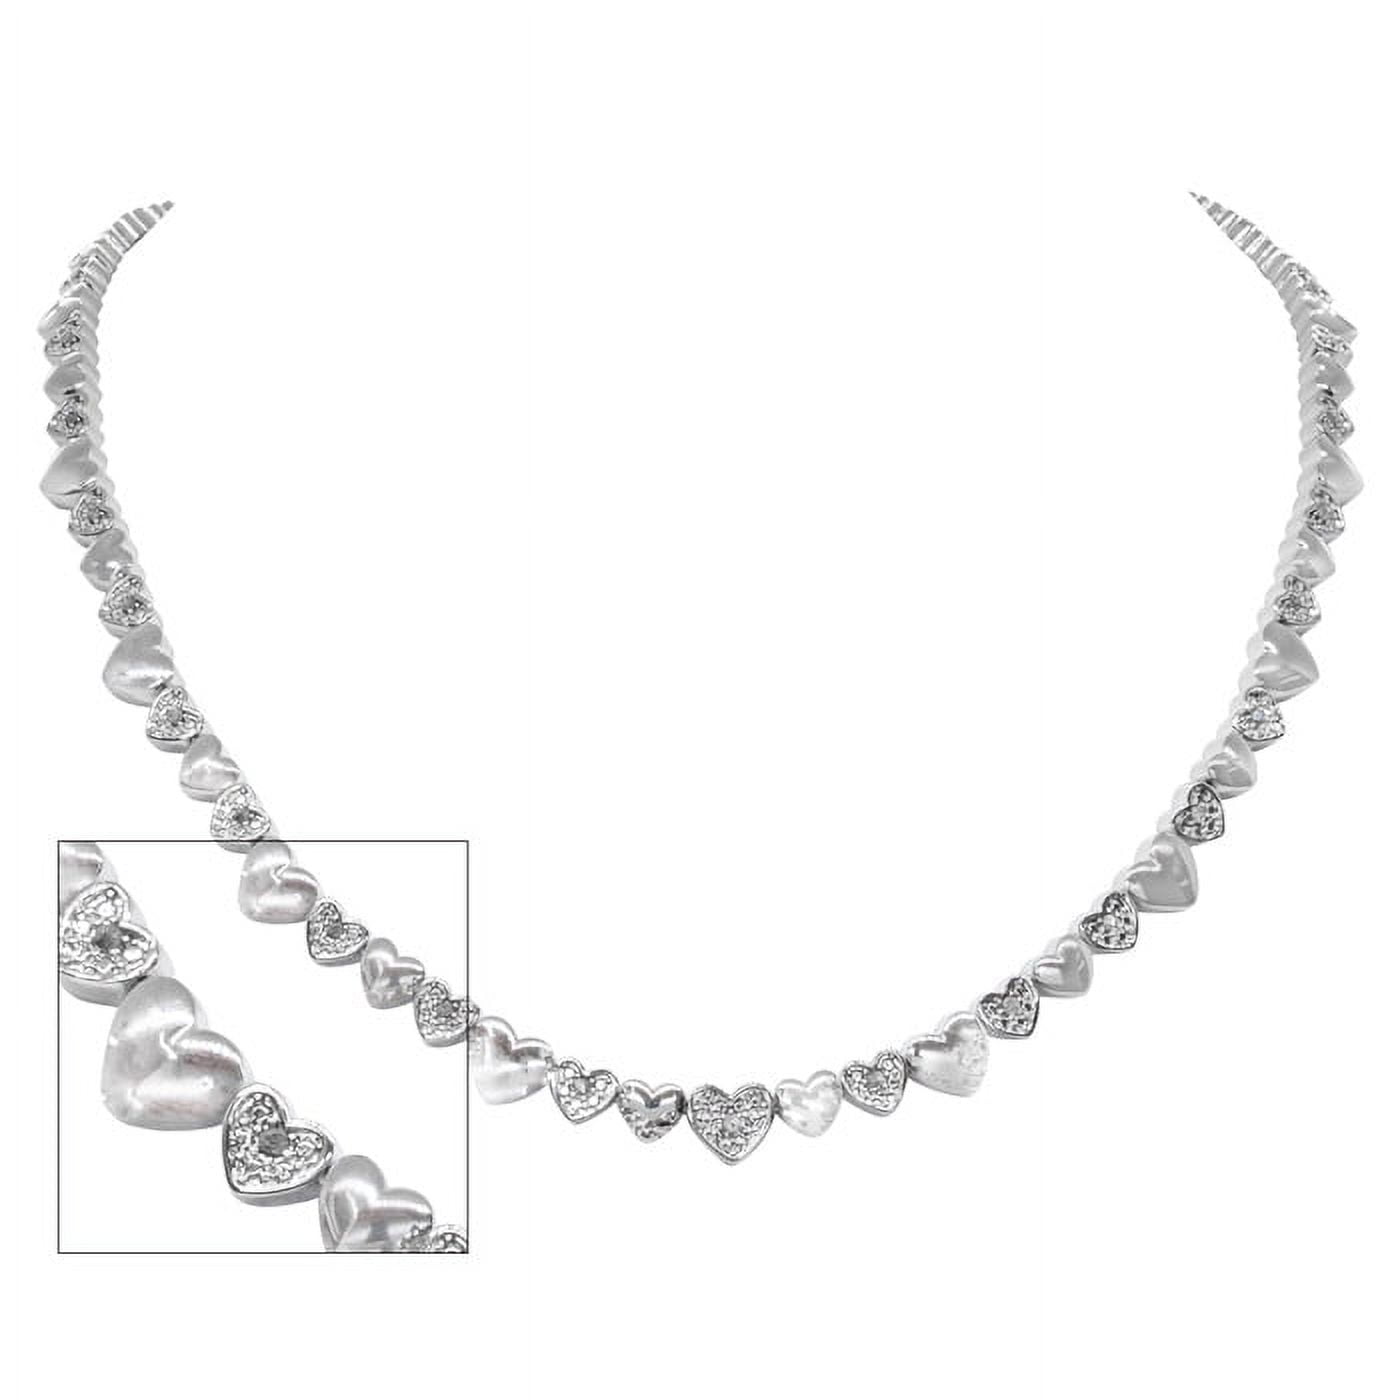 Bling Jewelry Bridal Love Tennis Collar Necklace heart Shaped CZ Silver  Plated - Walmart.com